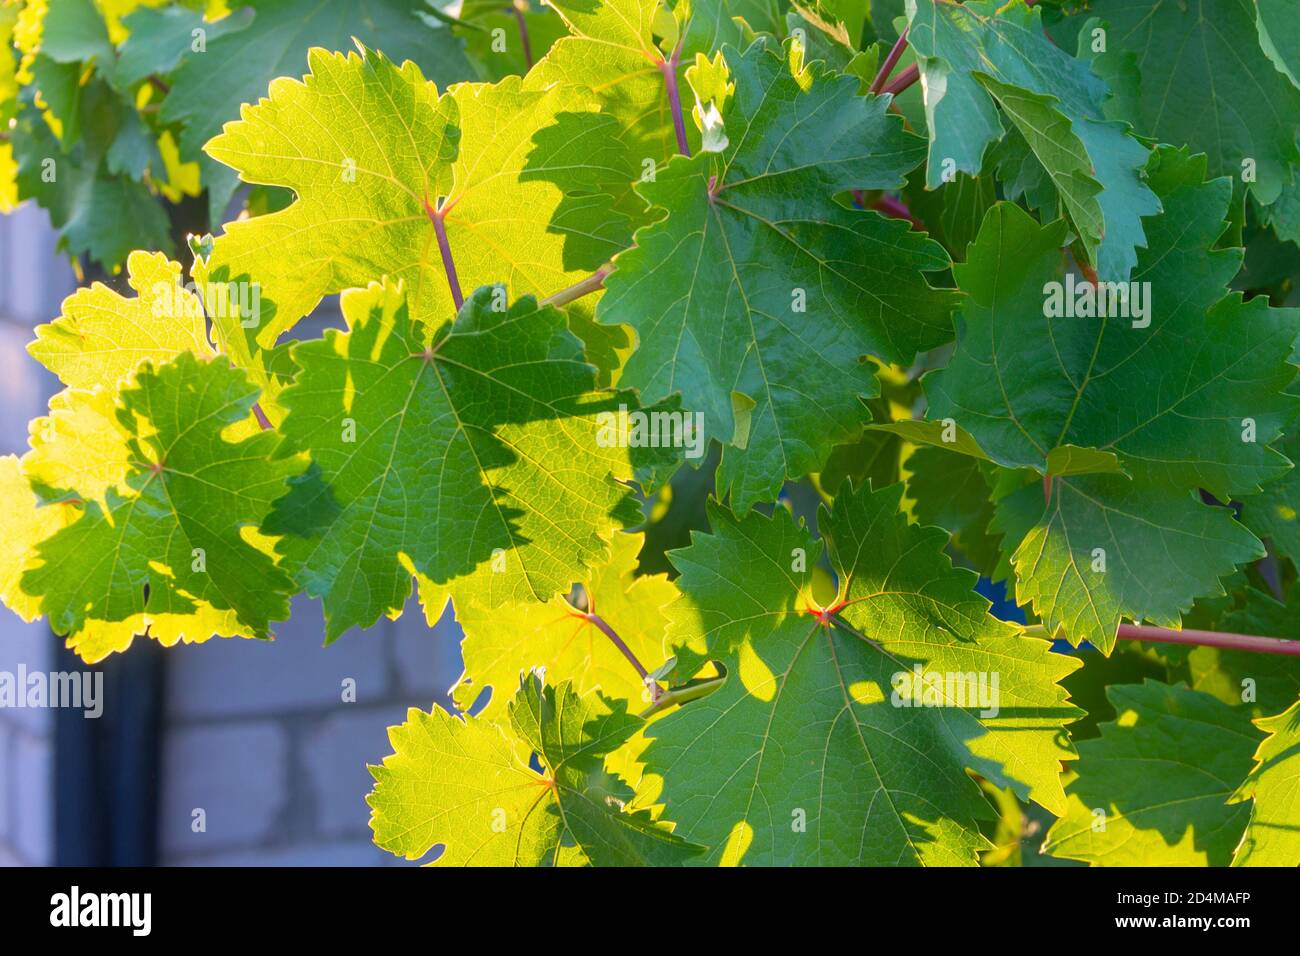 Large green leaves of grapes in sunlight. Close-up, selective focus. Stock Photo